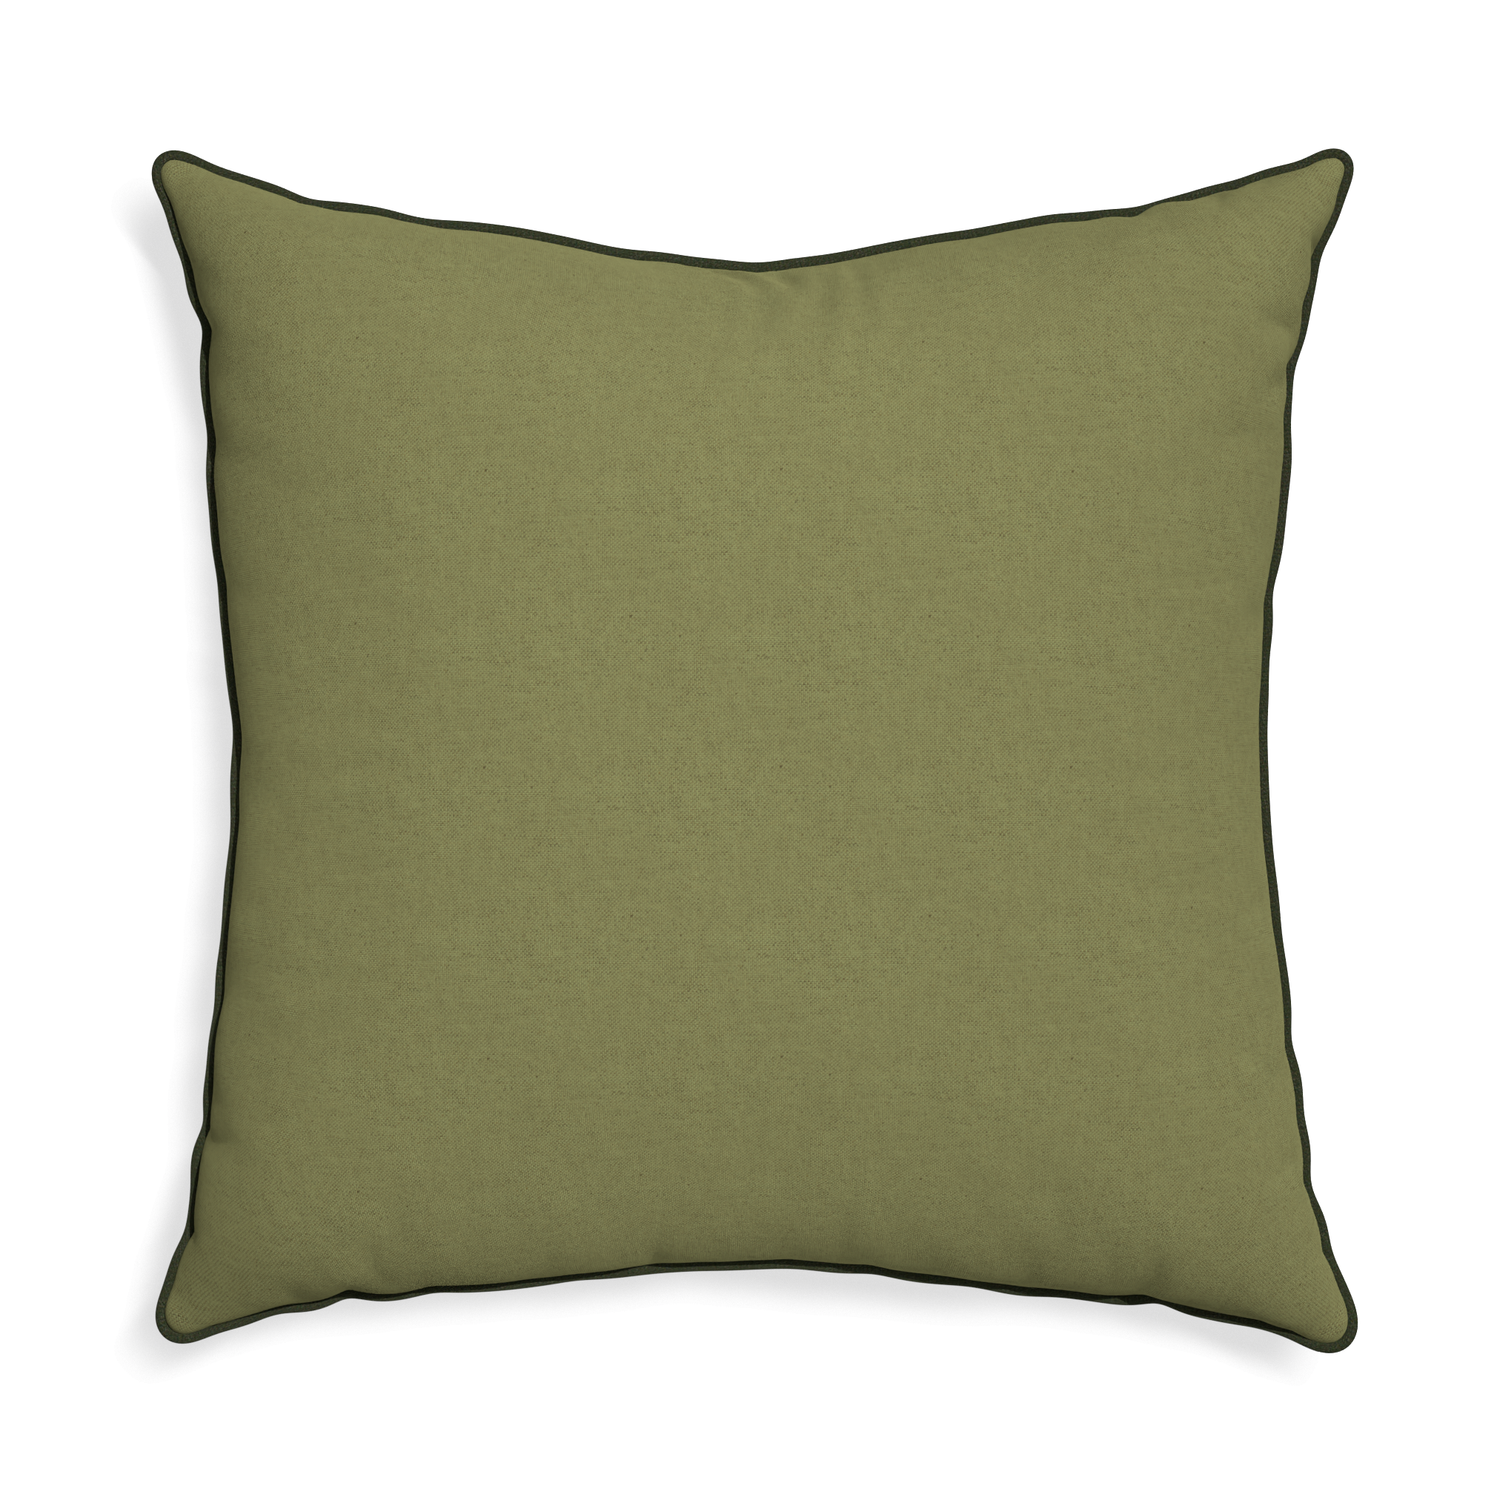 Euro-sham moss custom moss greenpillow with f piping on white background